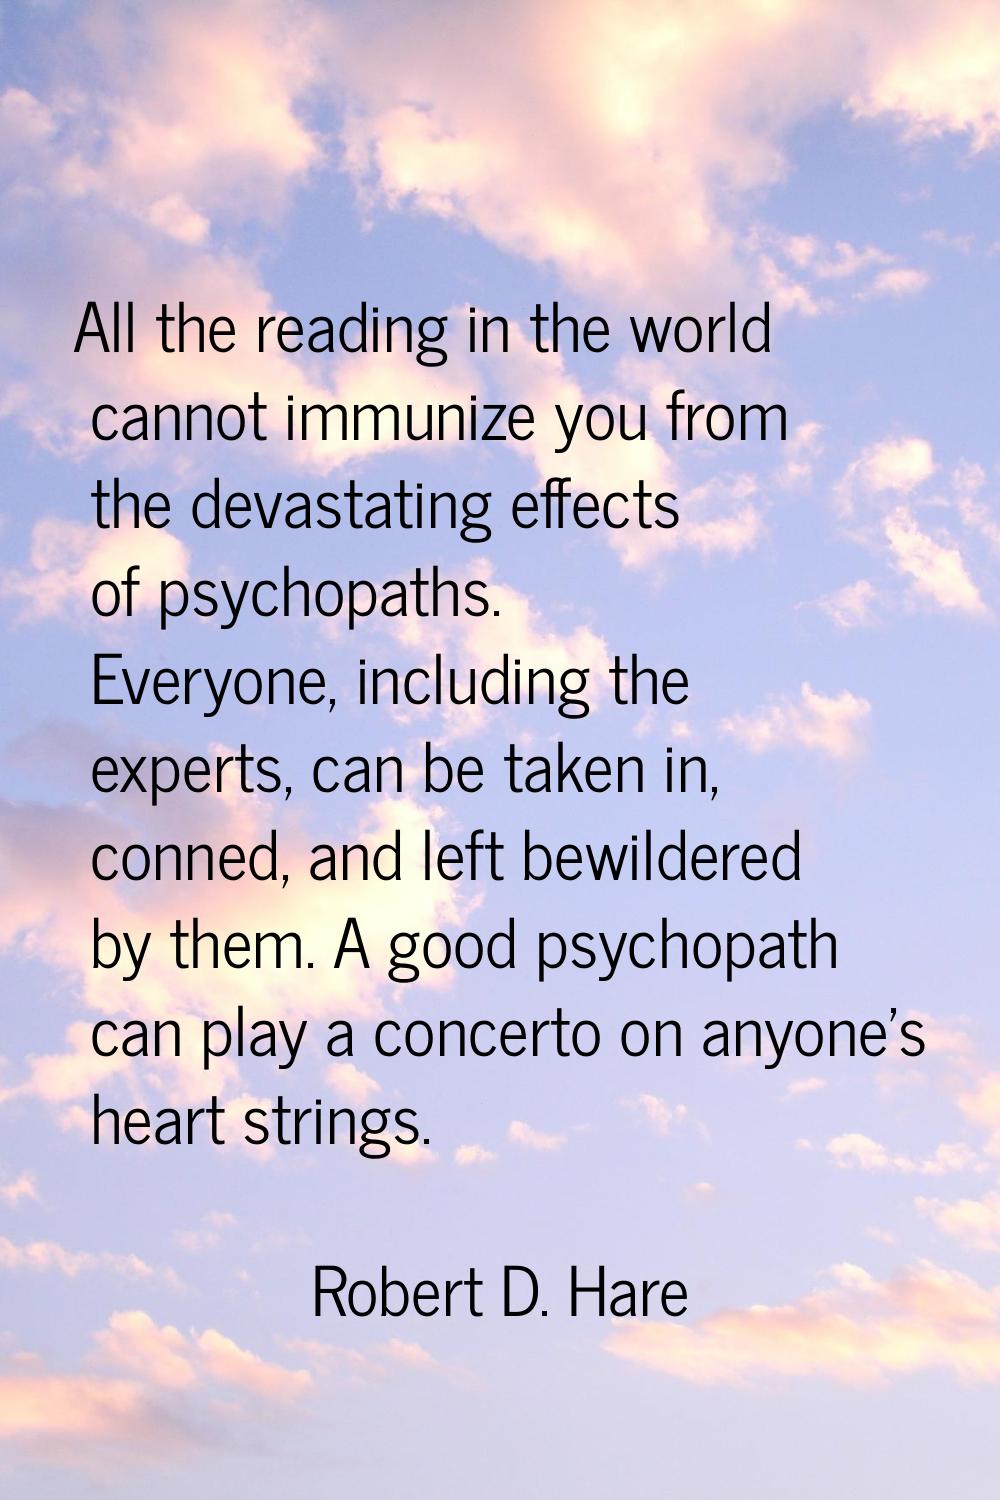 All the reading in the world cannot immunize you from the devastating effects of psychopaths. Every